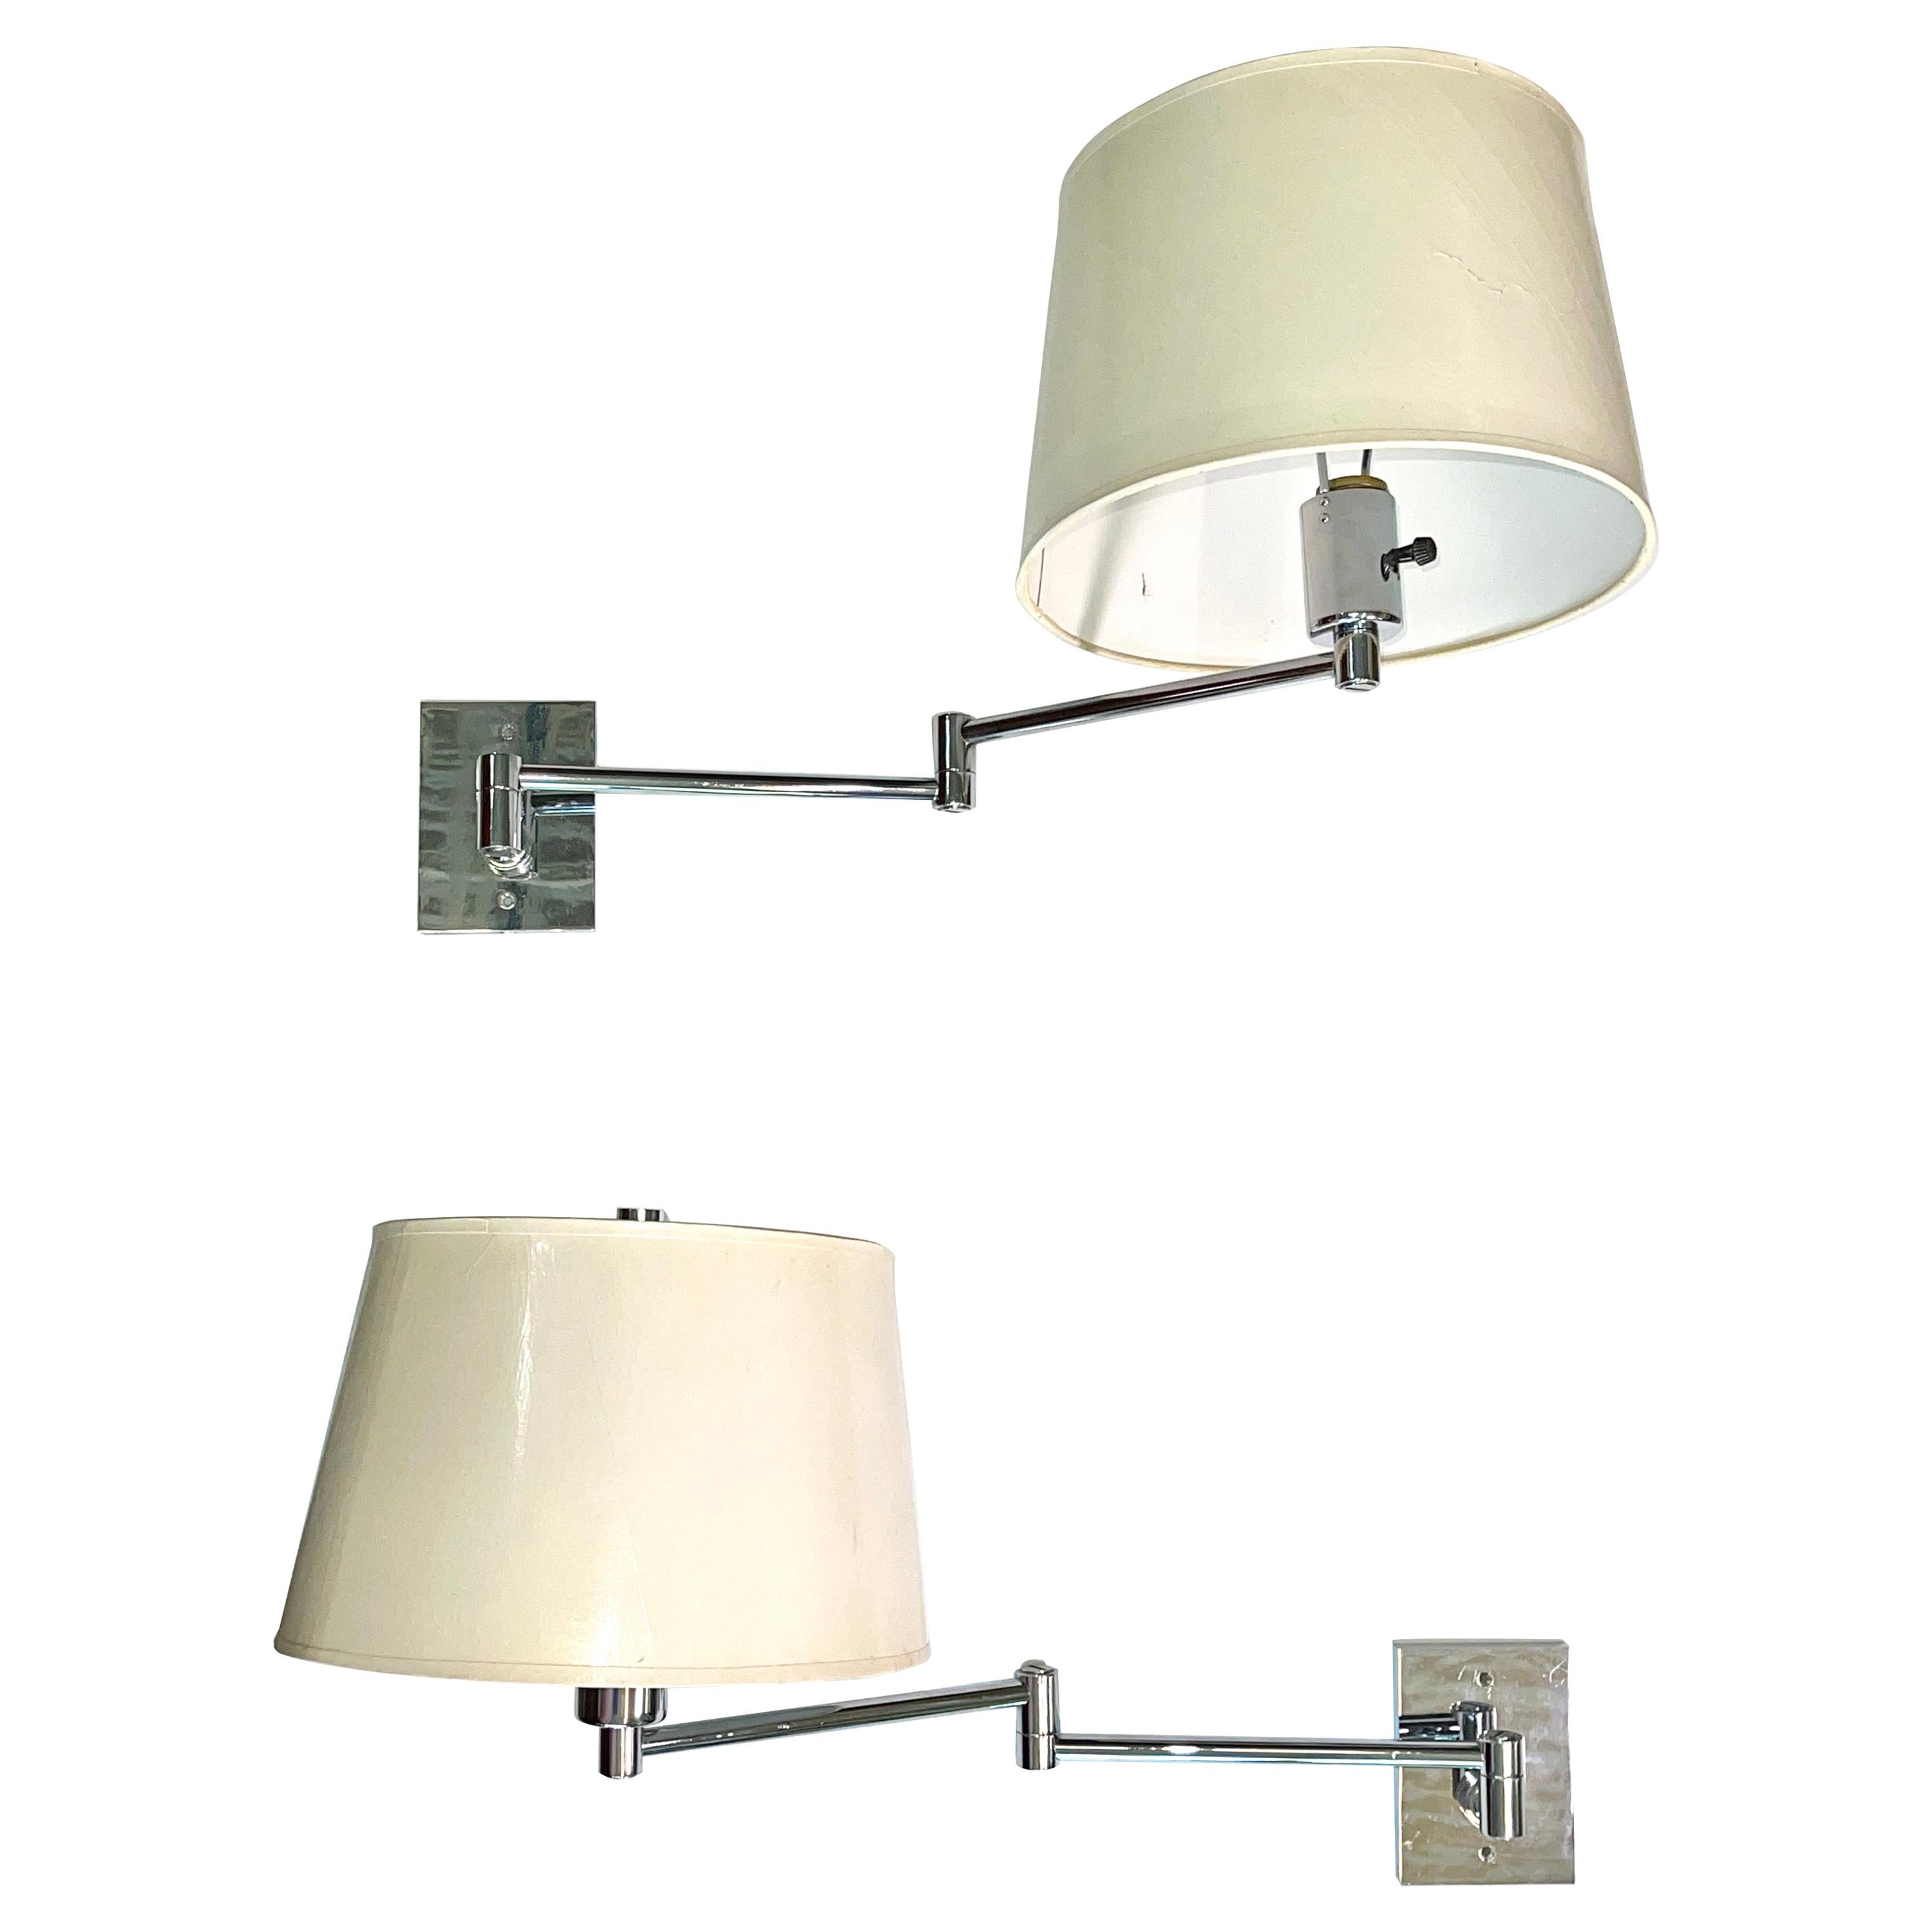 Pair of George W. Hansen Chrome Swing Arm Wall Lamps